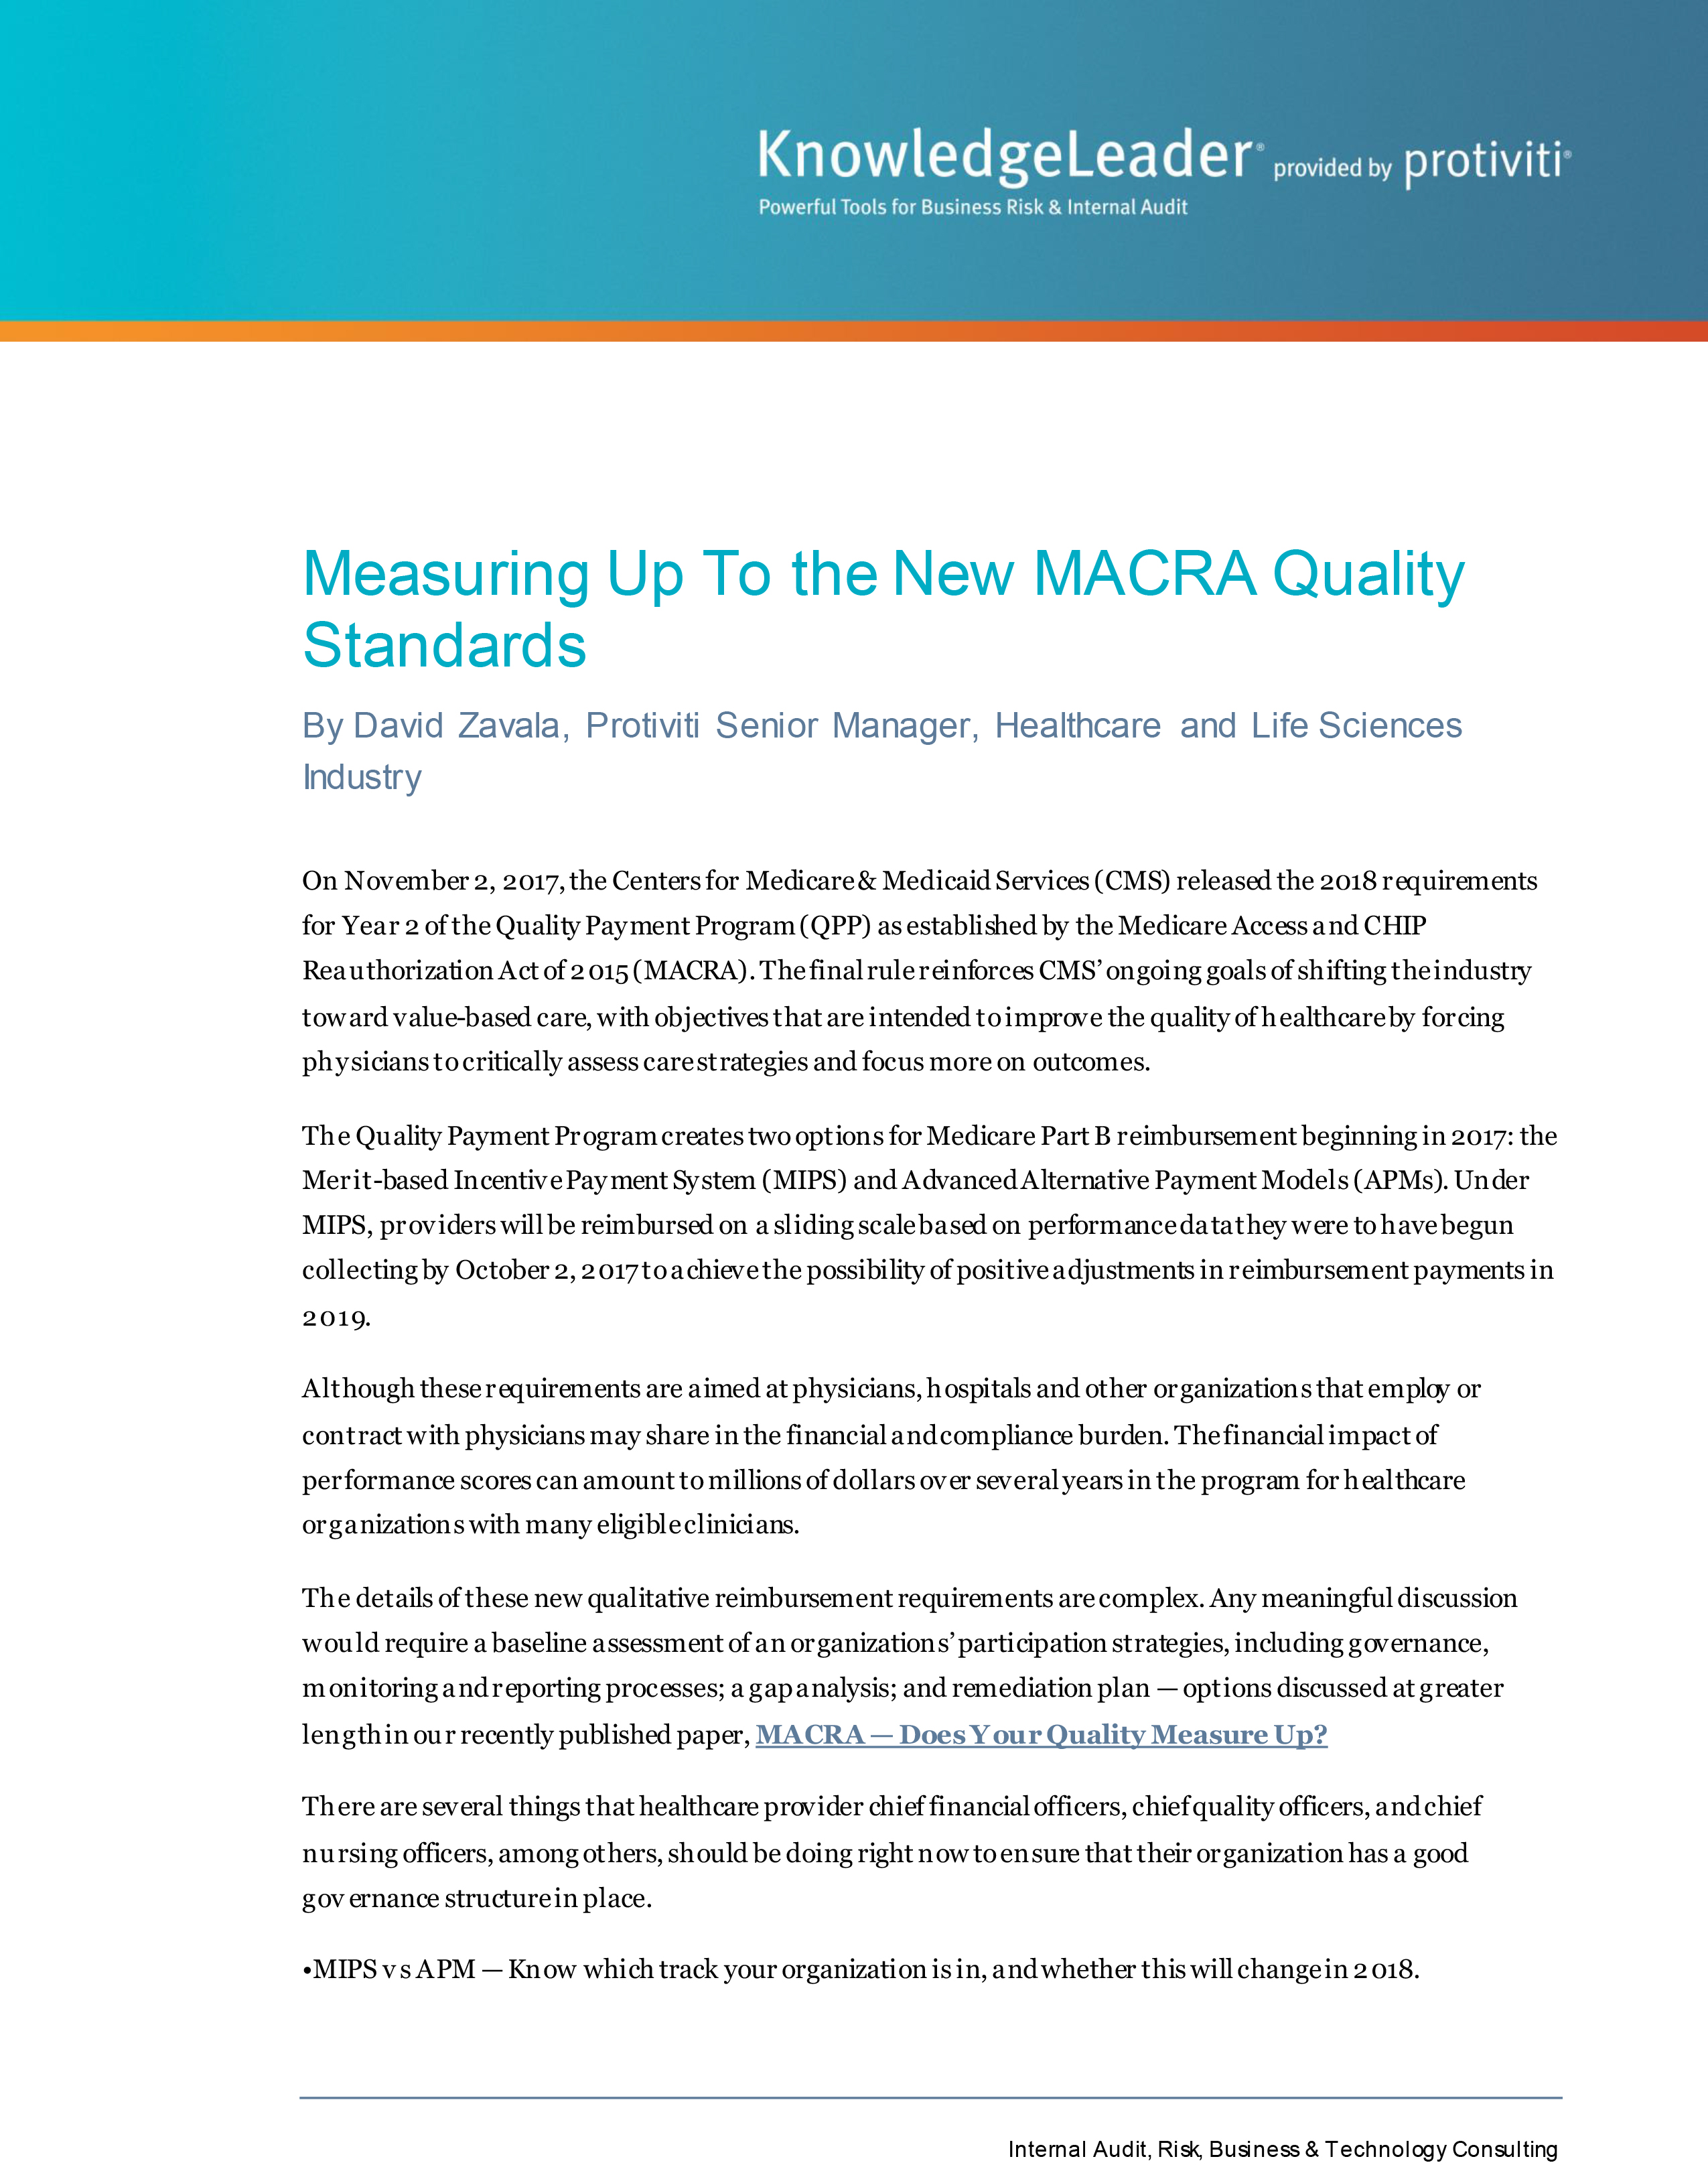 Screenshot of the first page of Measuring Up To the New MACRA Quality Standards